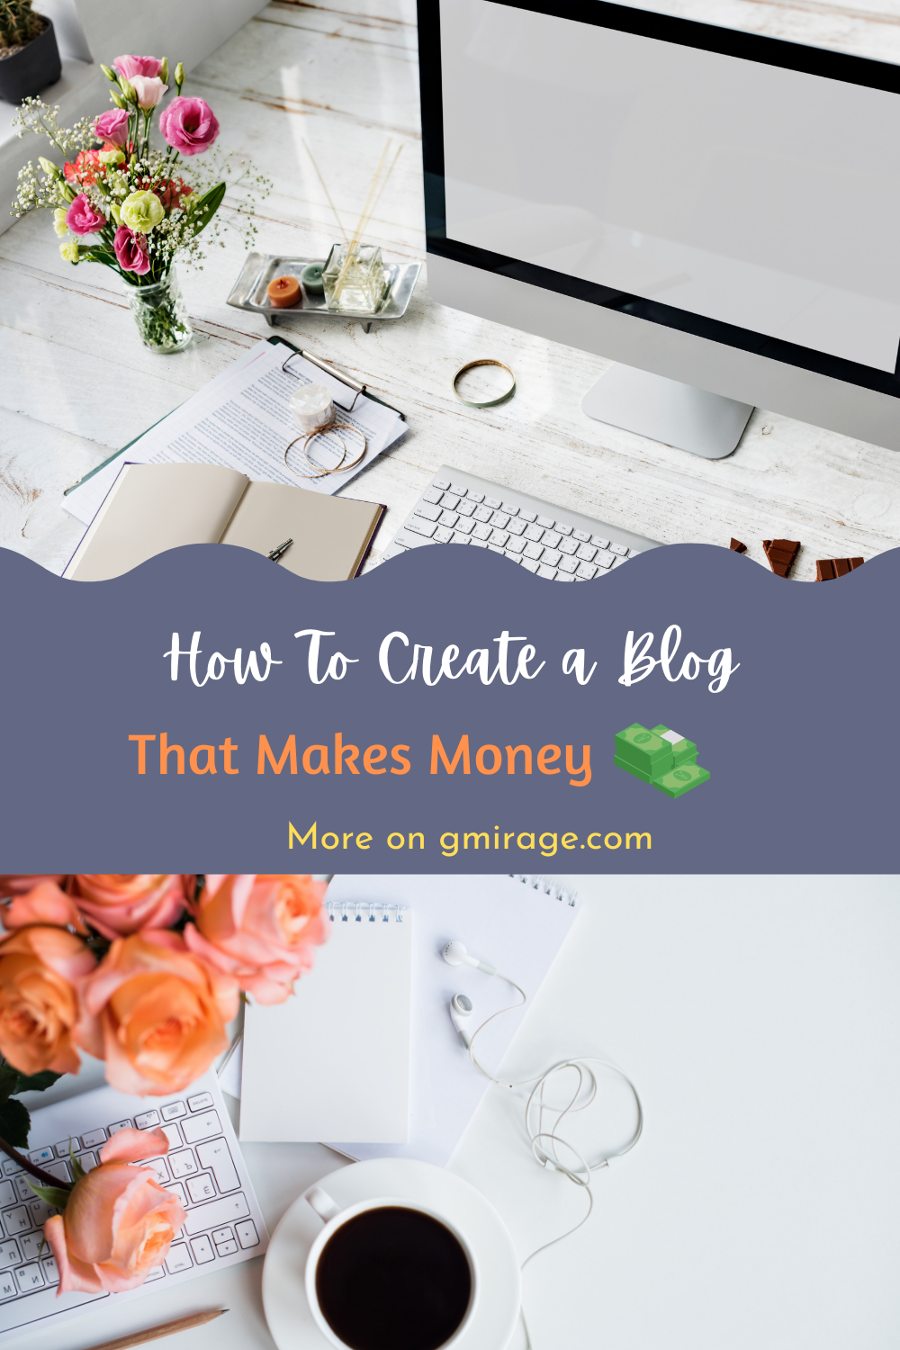 How To Create a Blog That Makes Money in 2022